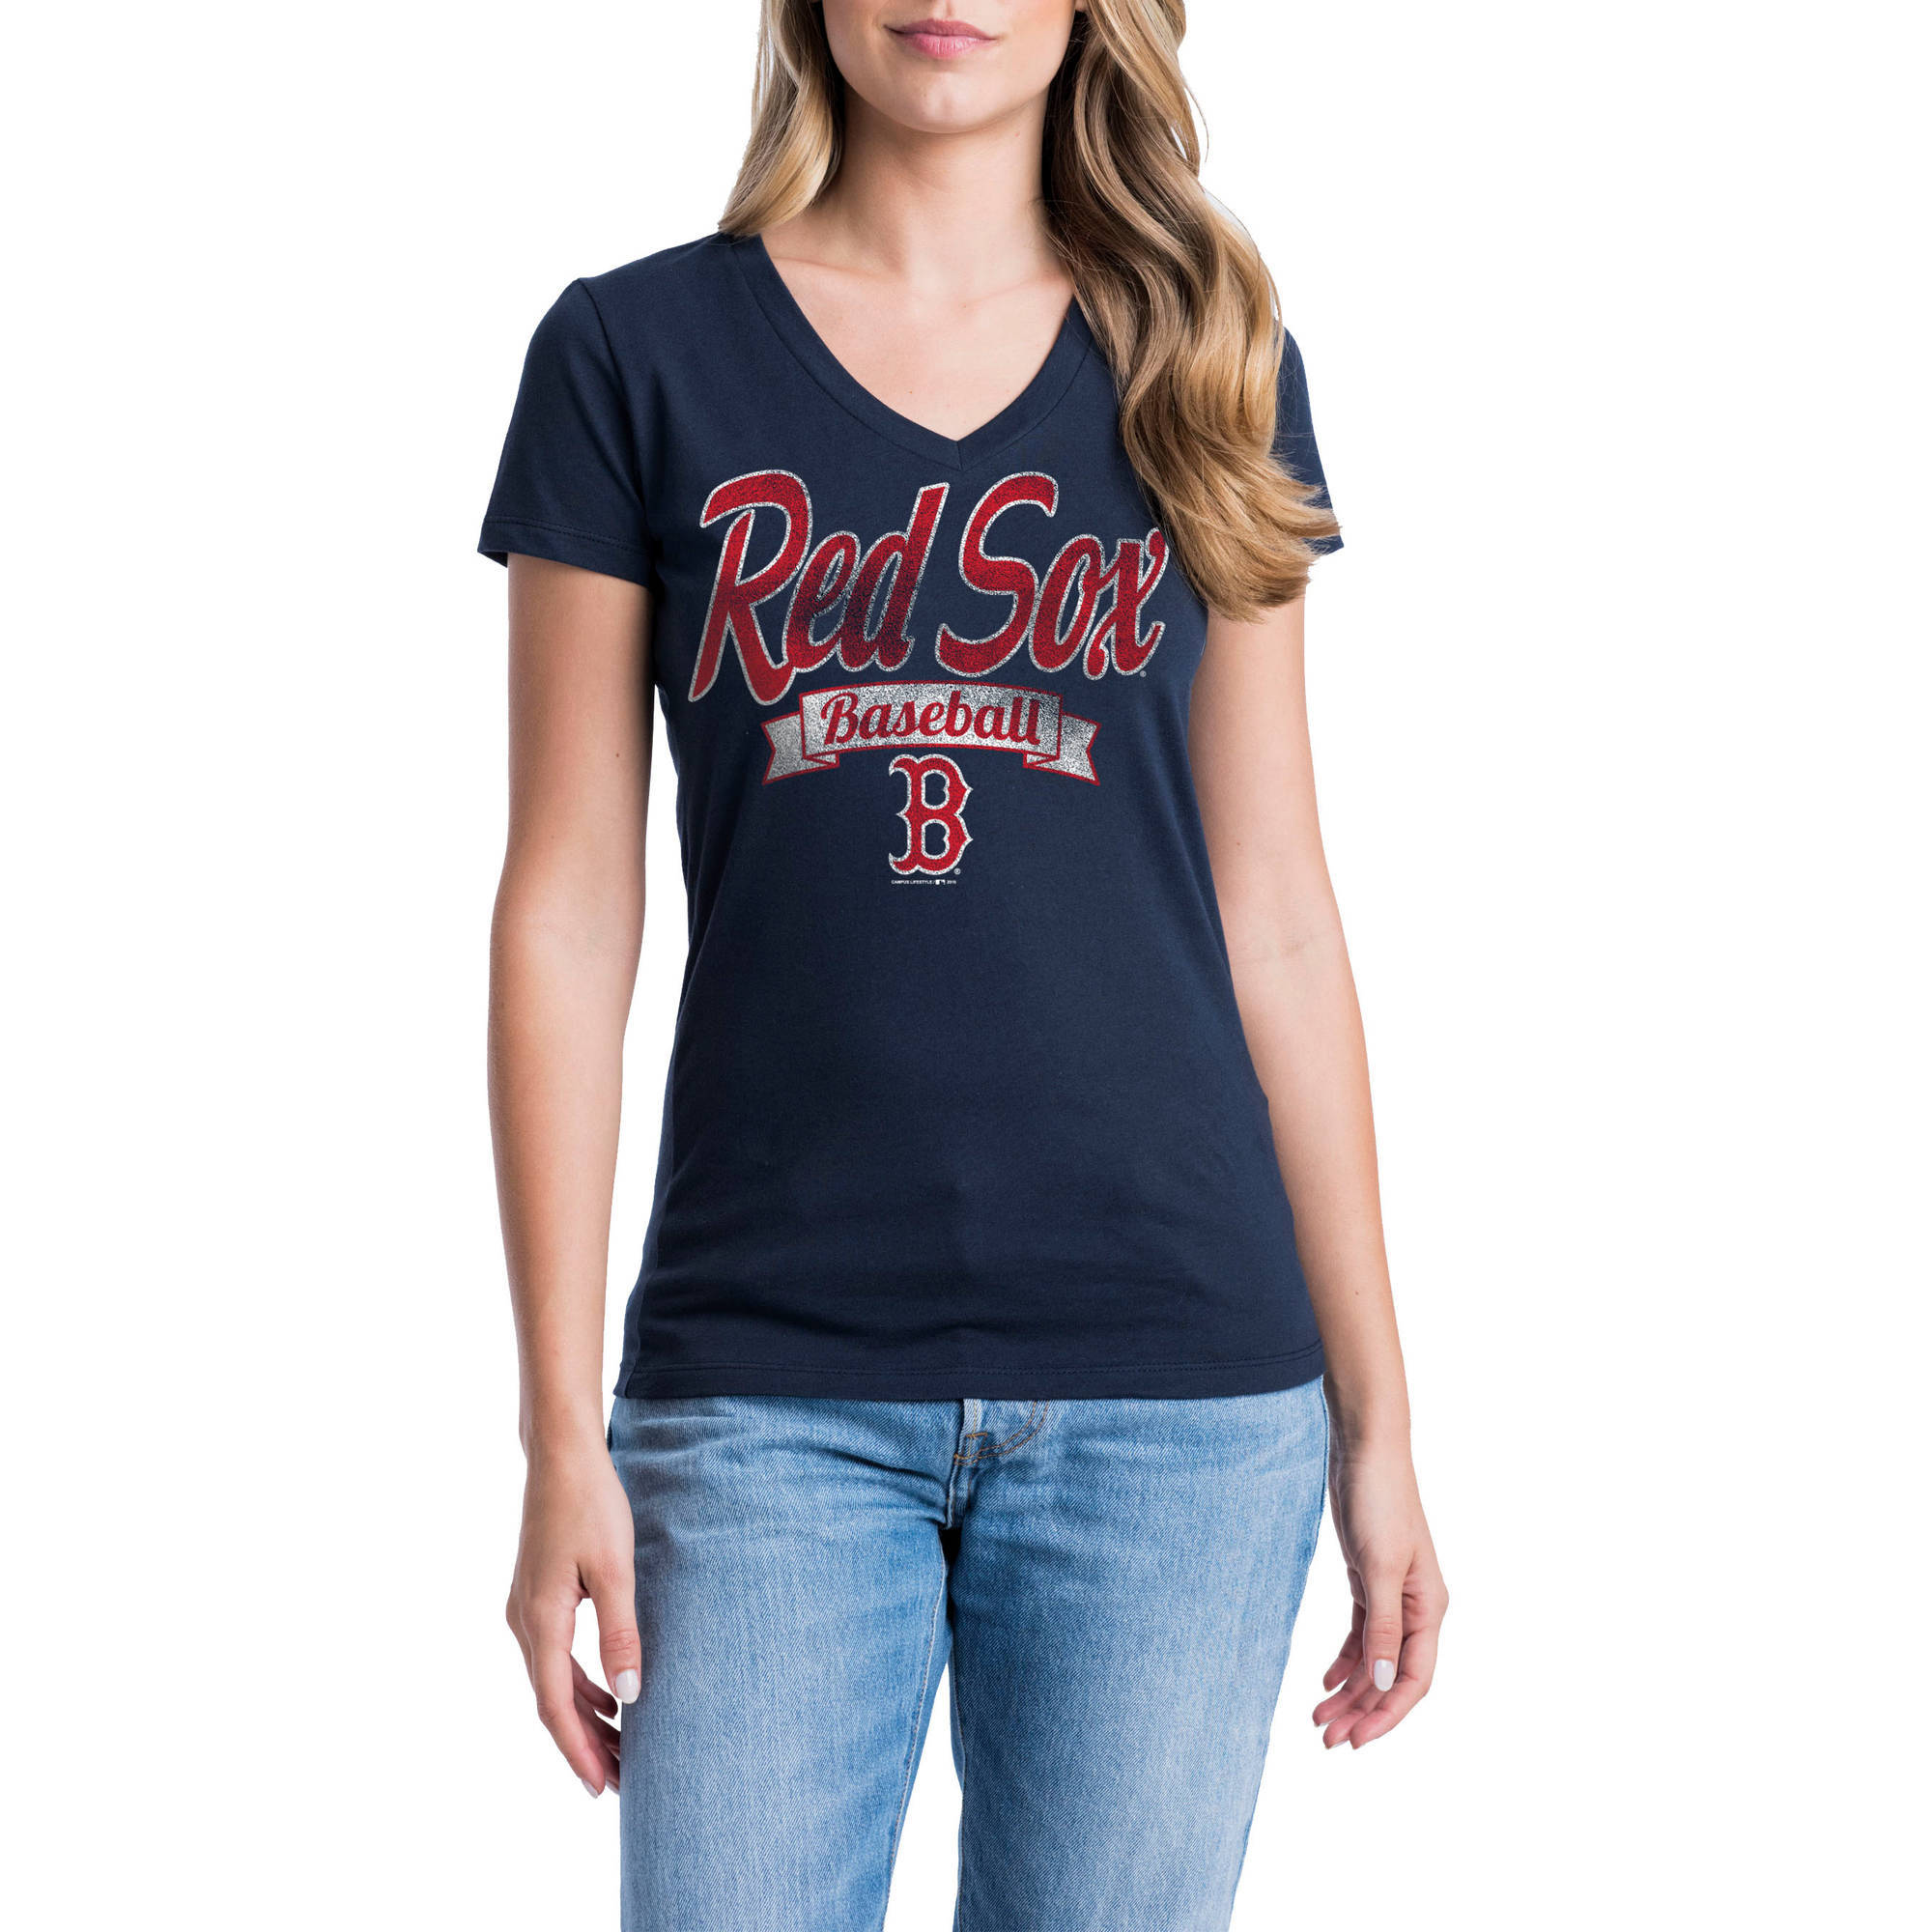 Boston Red Sox Womens Short Sleeve Graphic Tee - image 1 of 1